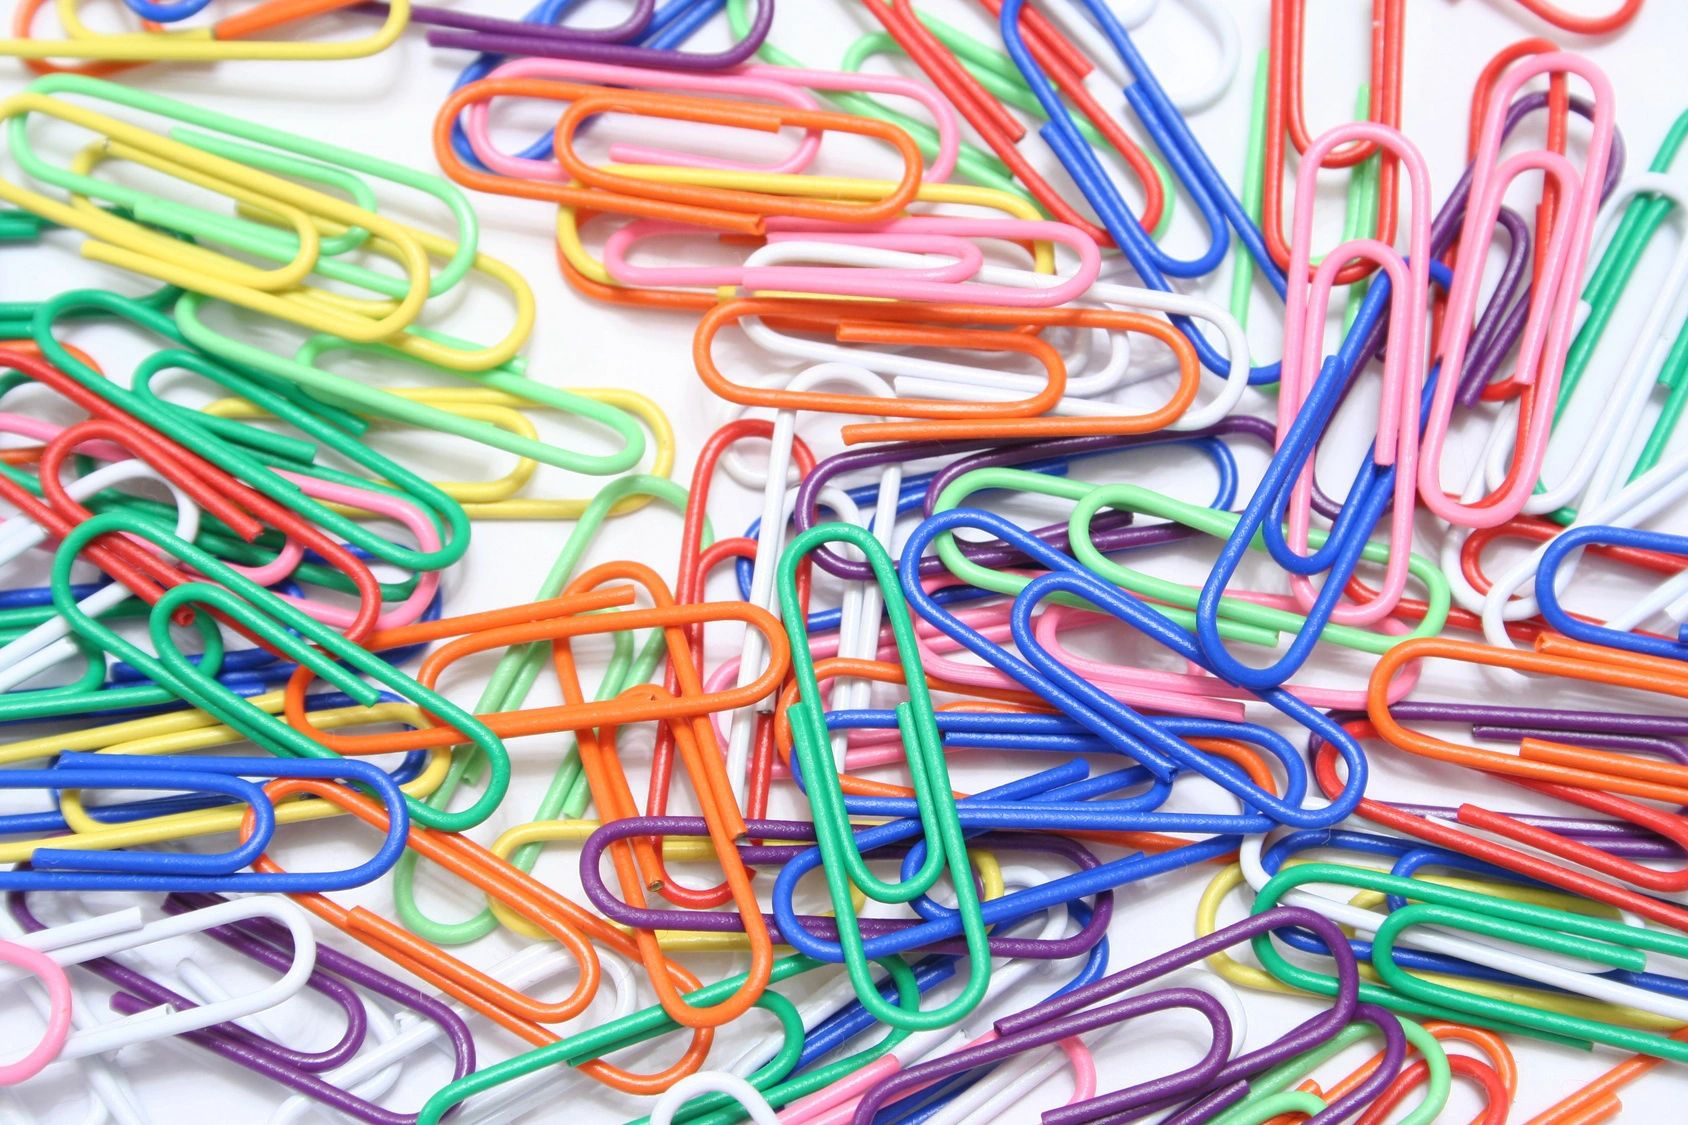 A large number of different coloured paperclips spread out.